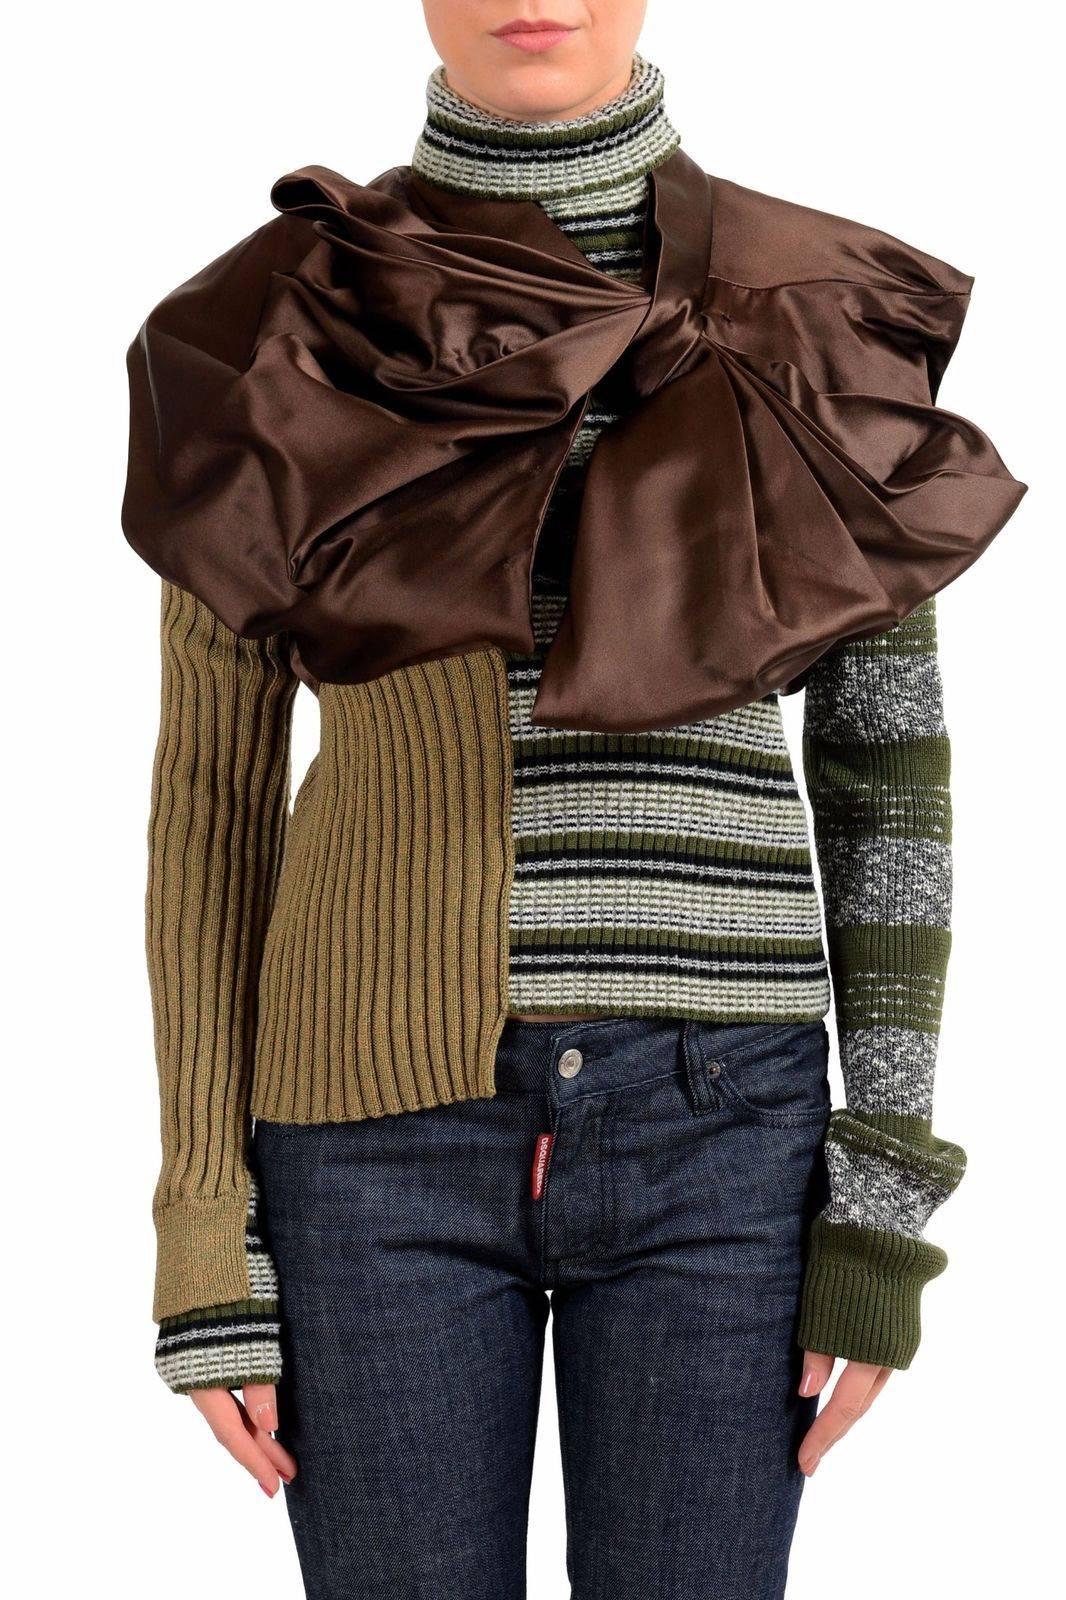 Stunning Masion Margiela mixed media asymmetric sweater adorned with large bow at shoulder.  As seen on the runway (see photo).
 
Fashioned of a soft wool, poly, viscose, and acrylic with all the marvelous fine Italian design and manufacture. 